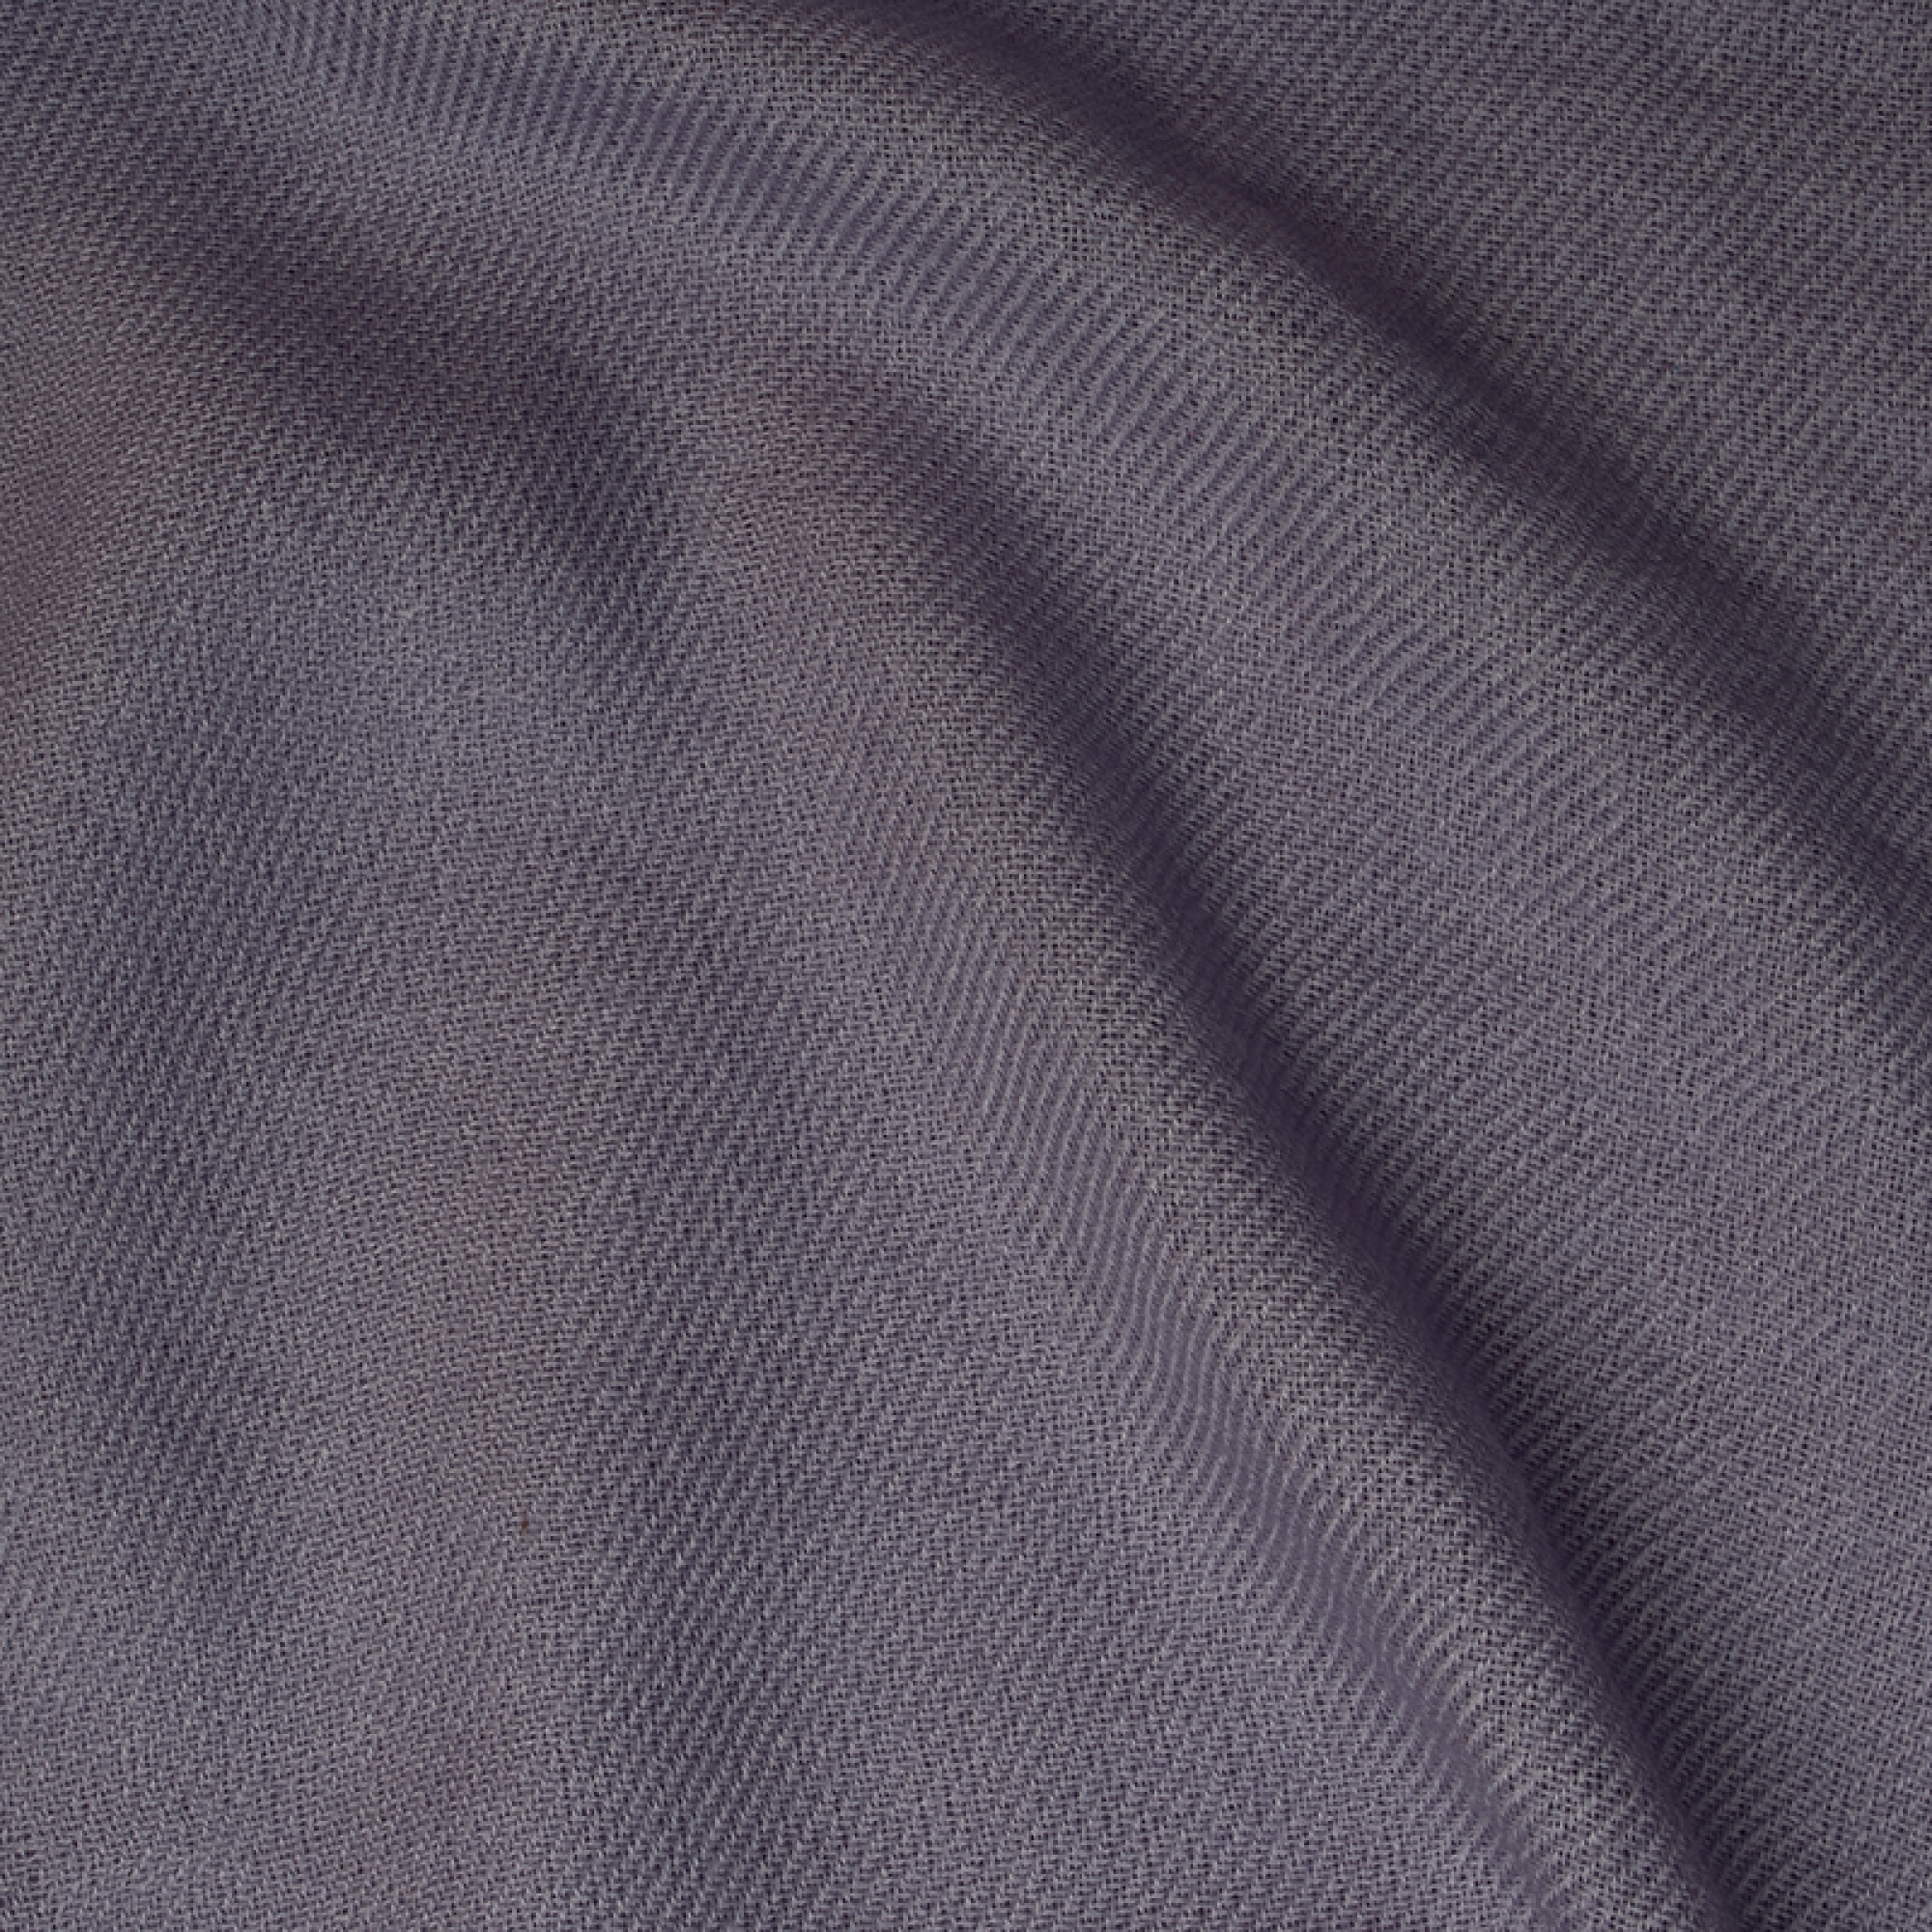 Cashmere accessories cocooning toodoo plain m 180 x 220 heirloom lilac 180 x 220 cm